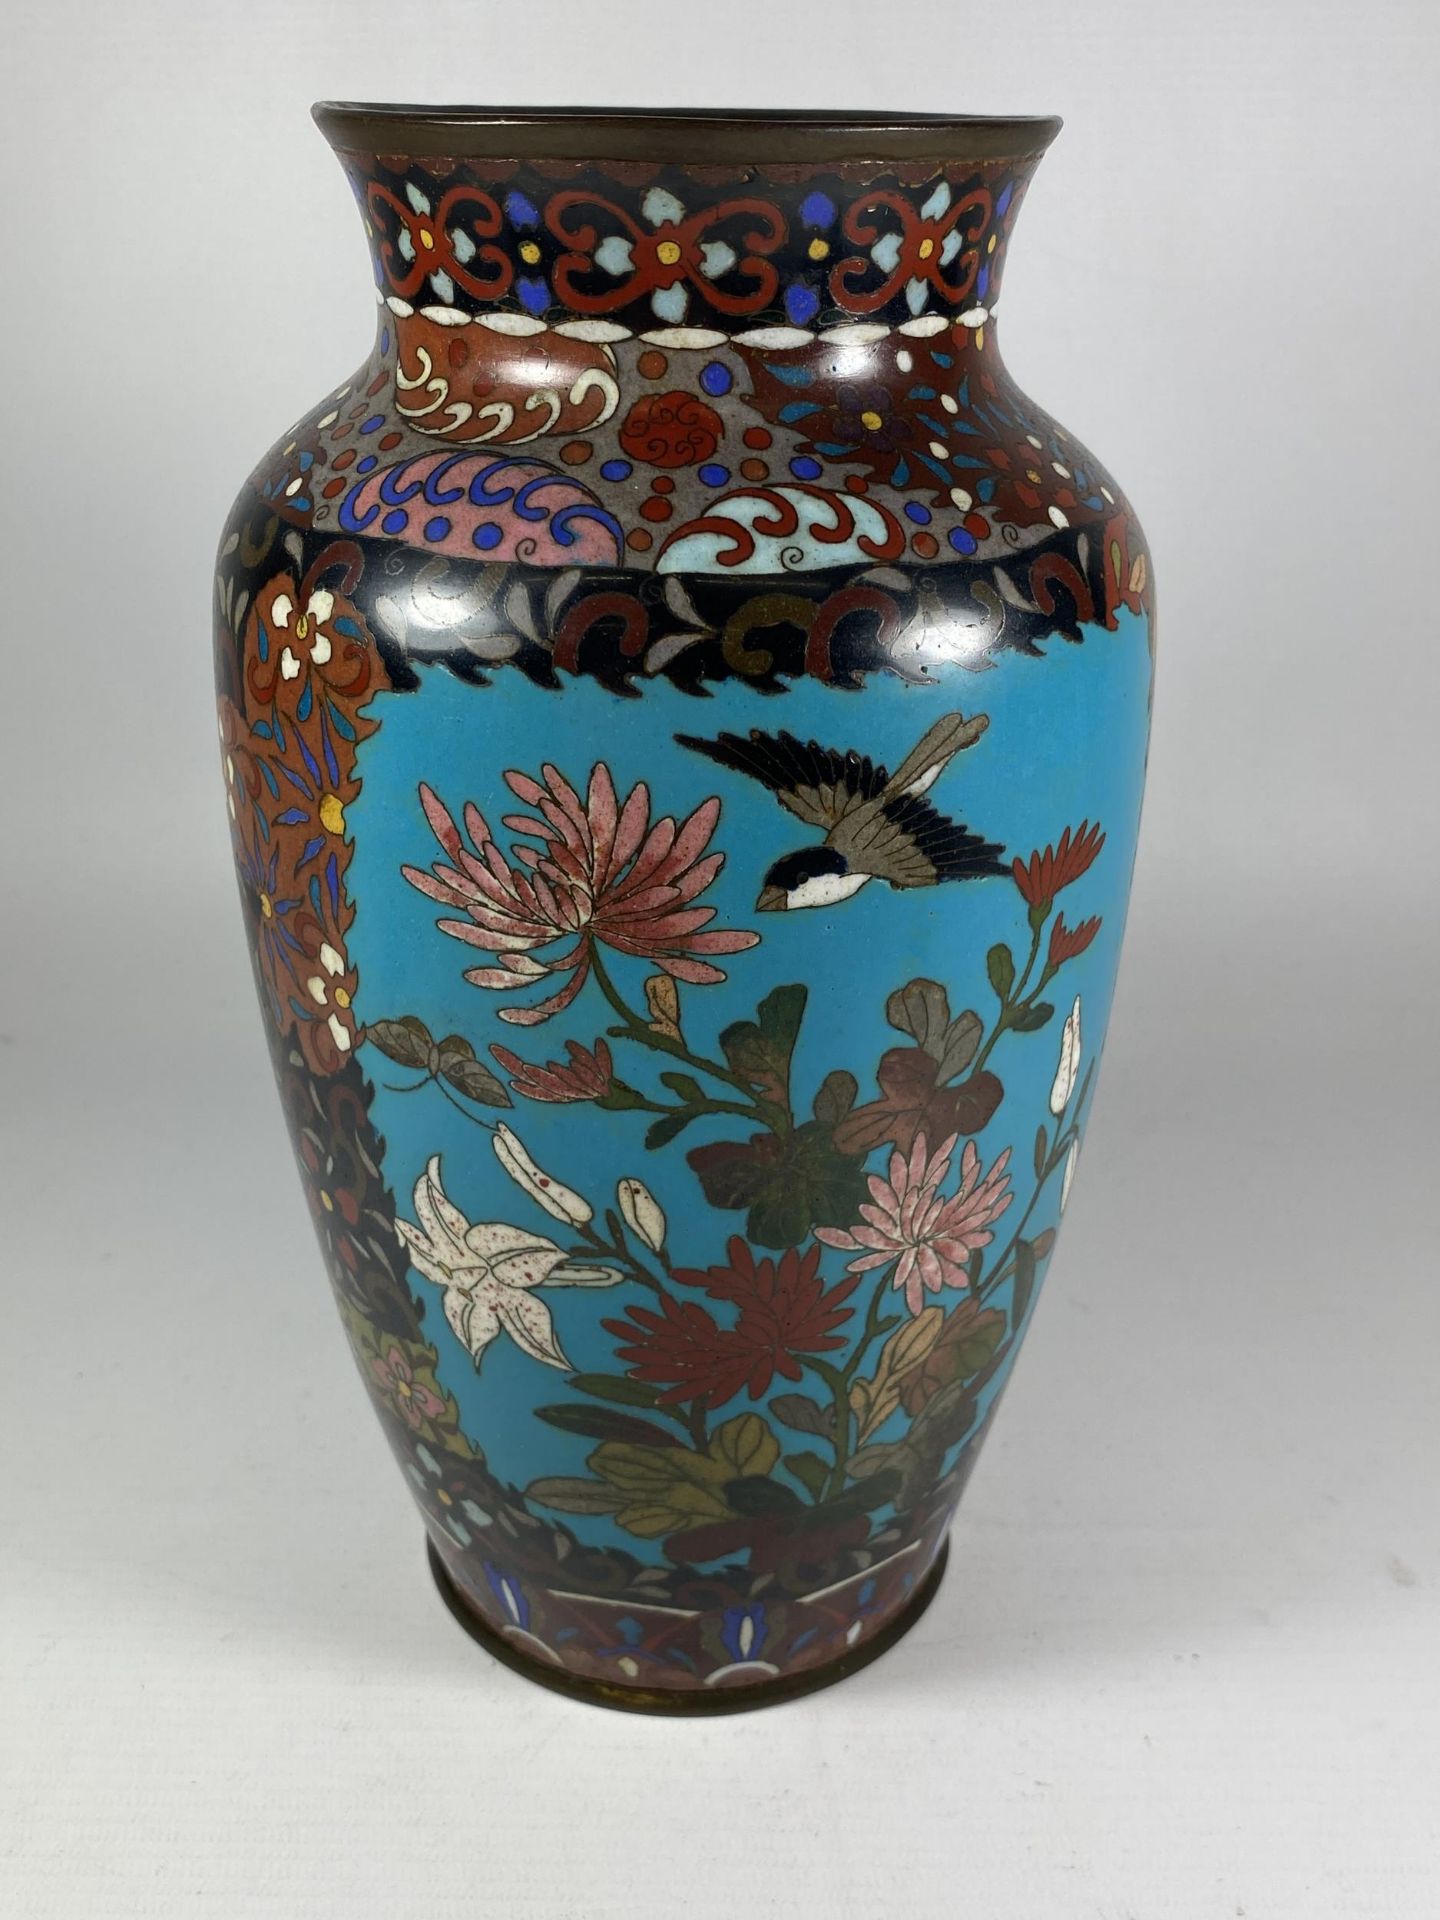 A 19TH CENTURY CHINESE CLOISONNE VASE WITH BIRD & FLORAL DESIGN, HEIGHT 26.5CM